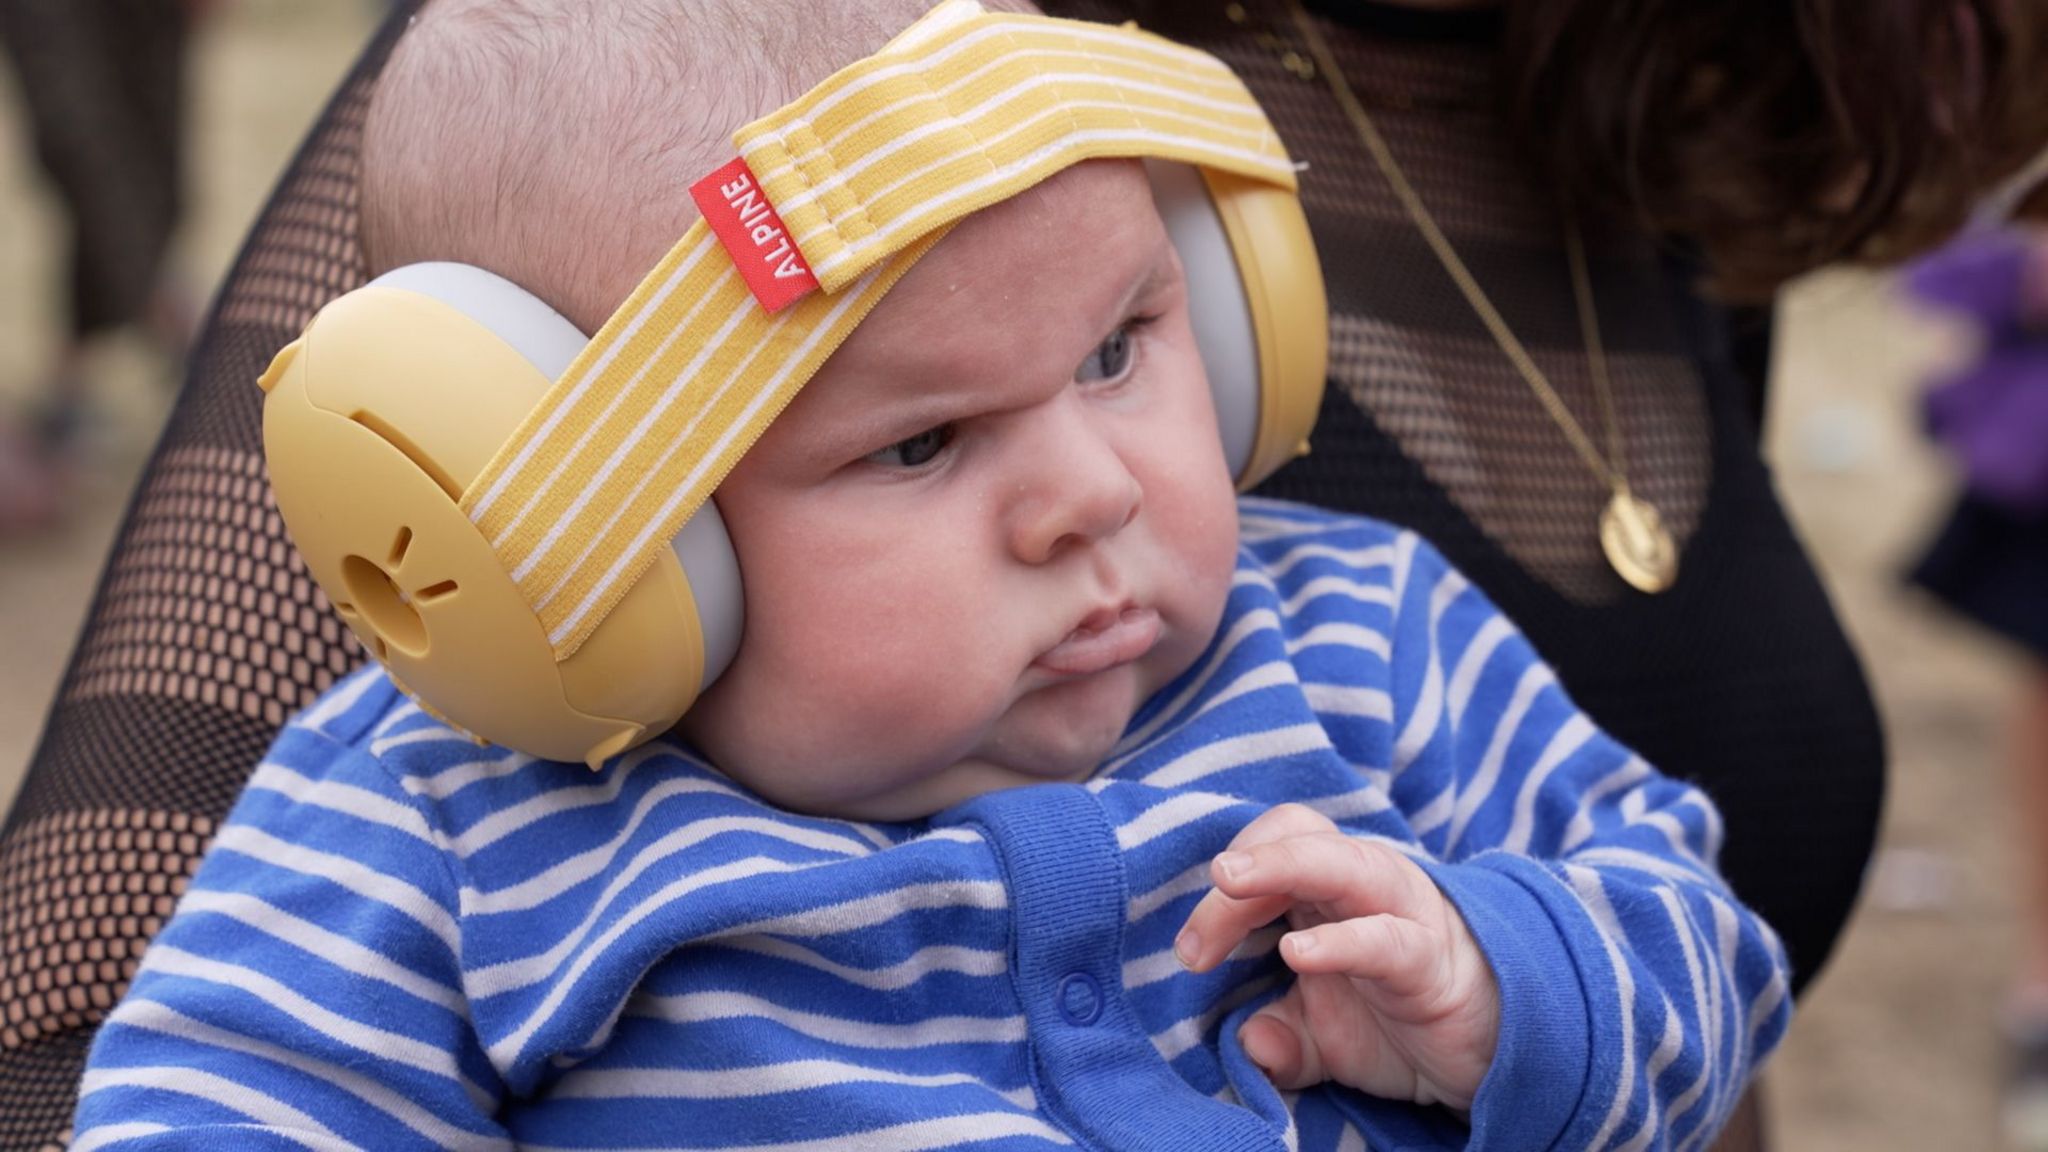 A baby wearing ear defenders on his head